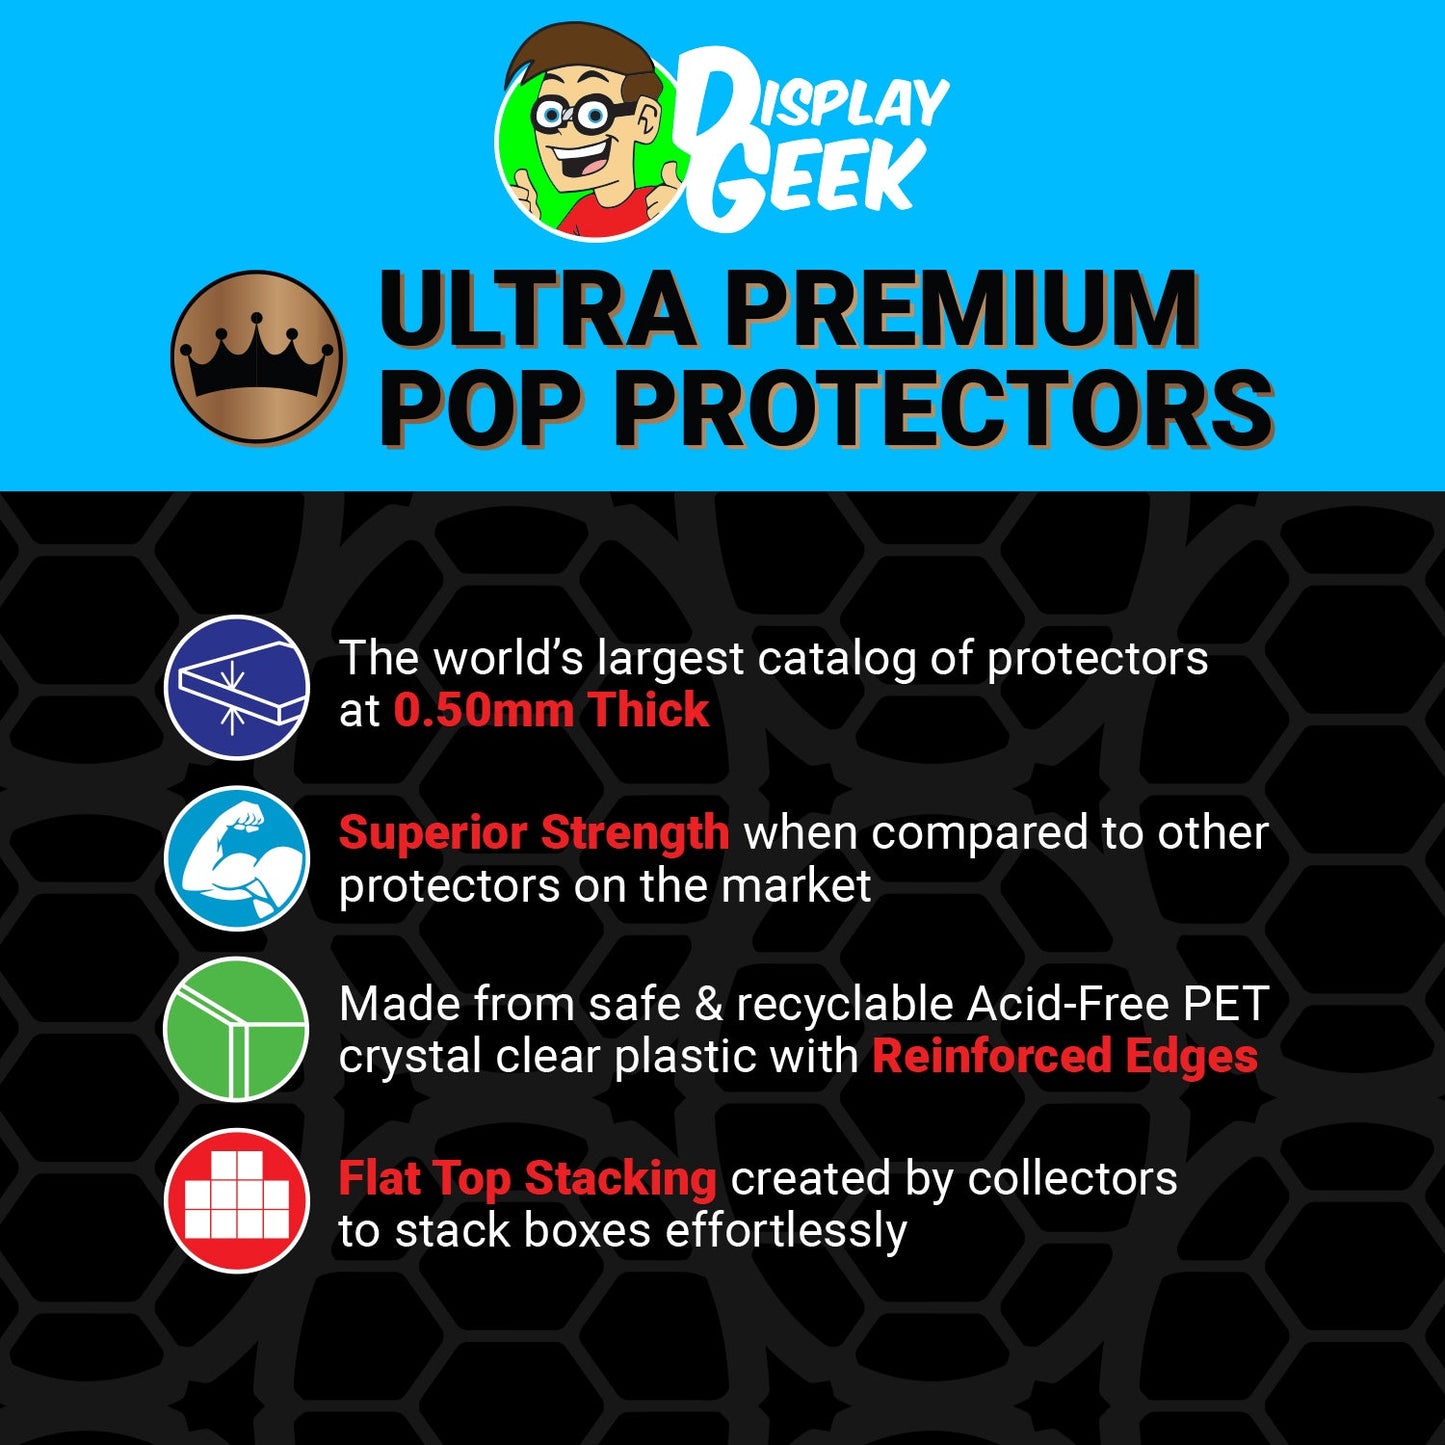 Pop Protector for Batmobile Gold SDCC #01 Funko Pop Rides - PPG Pop Protector Guide Search Created by Display Geek